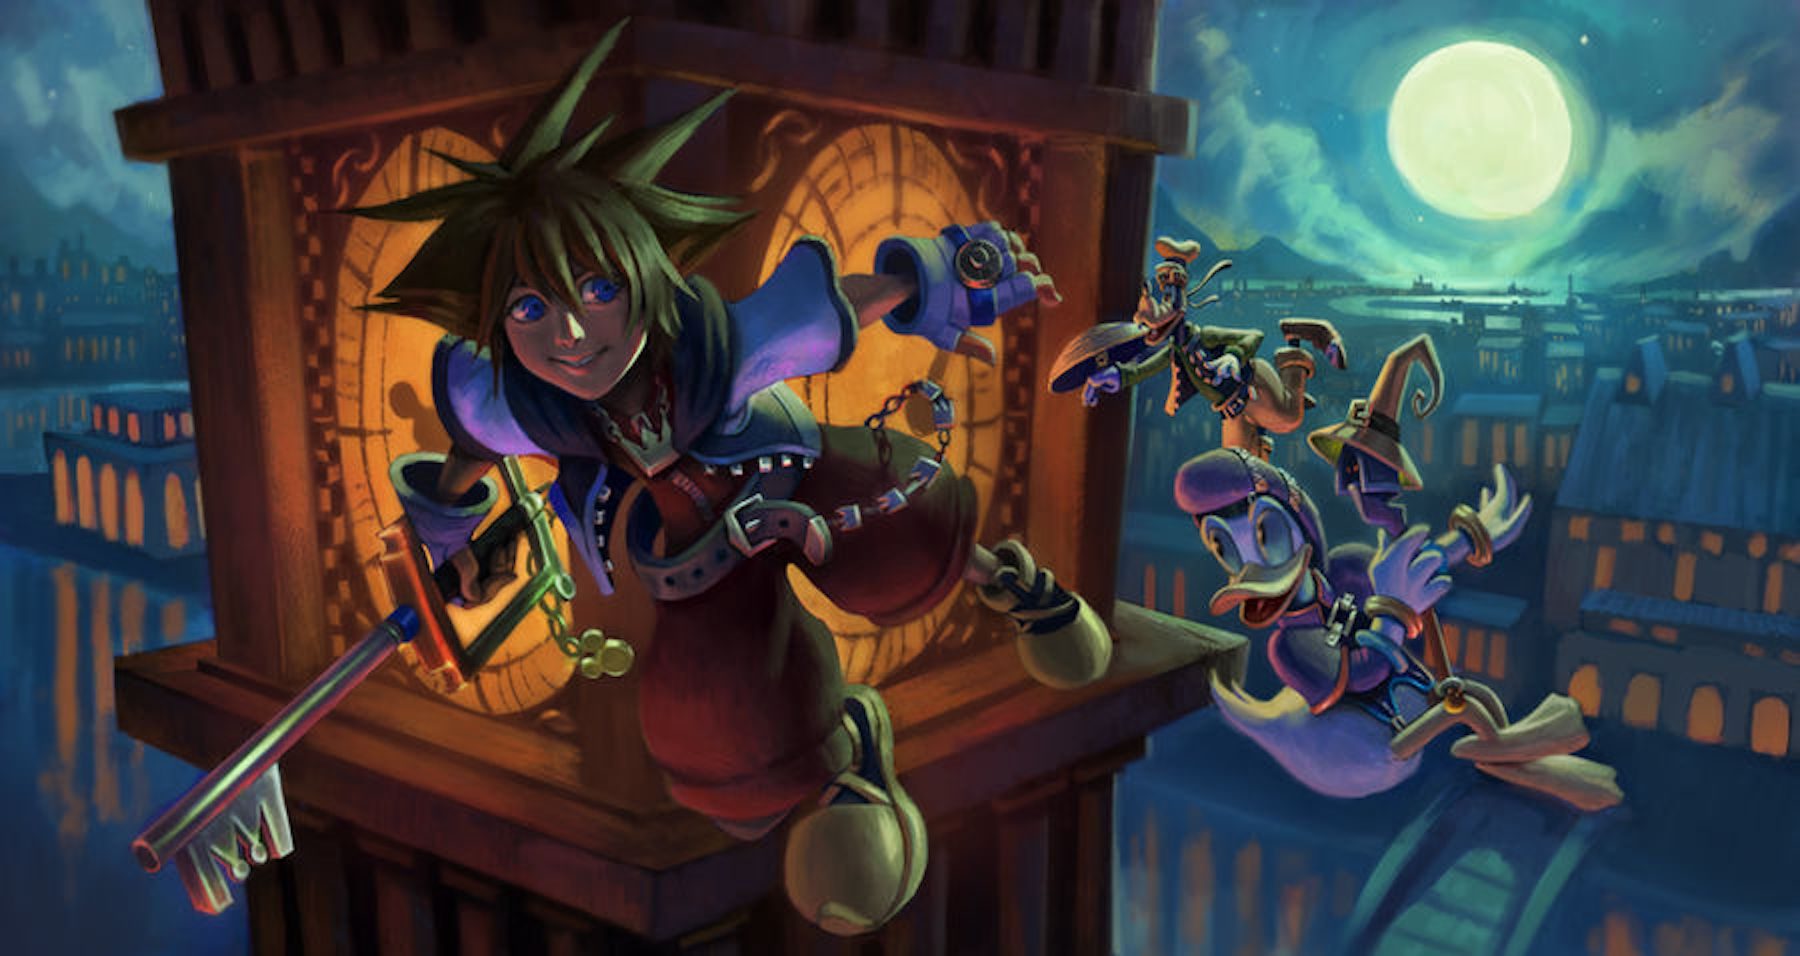 Sora, Goofy, and Donald Duck flying in Peter Pan's England in Kingdom Hearts.